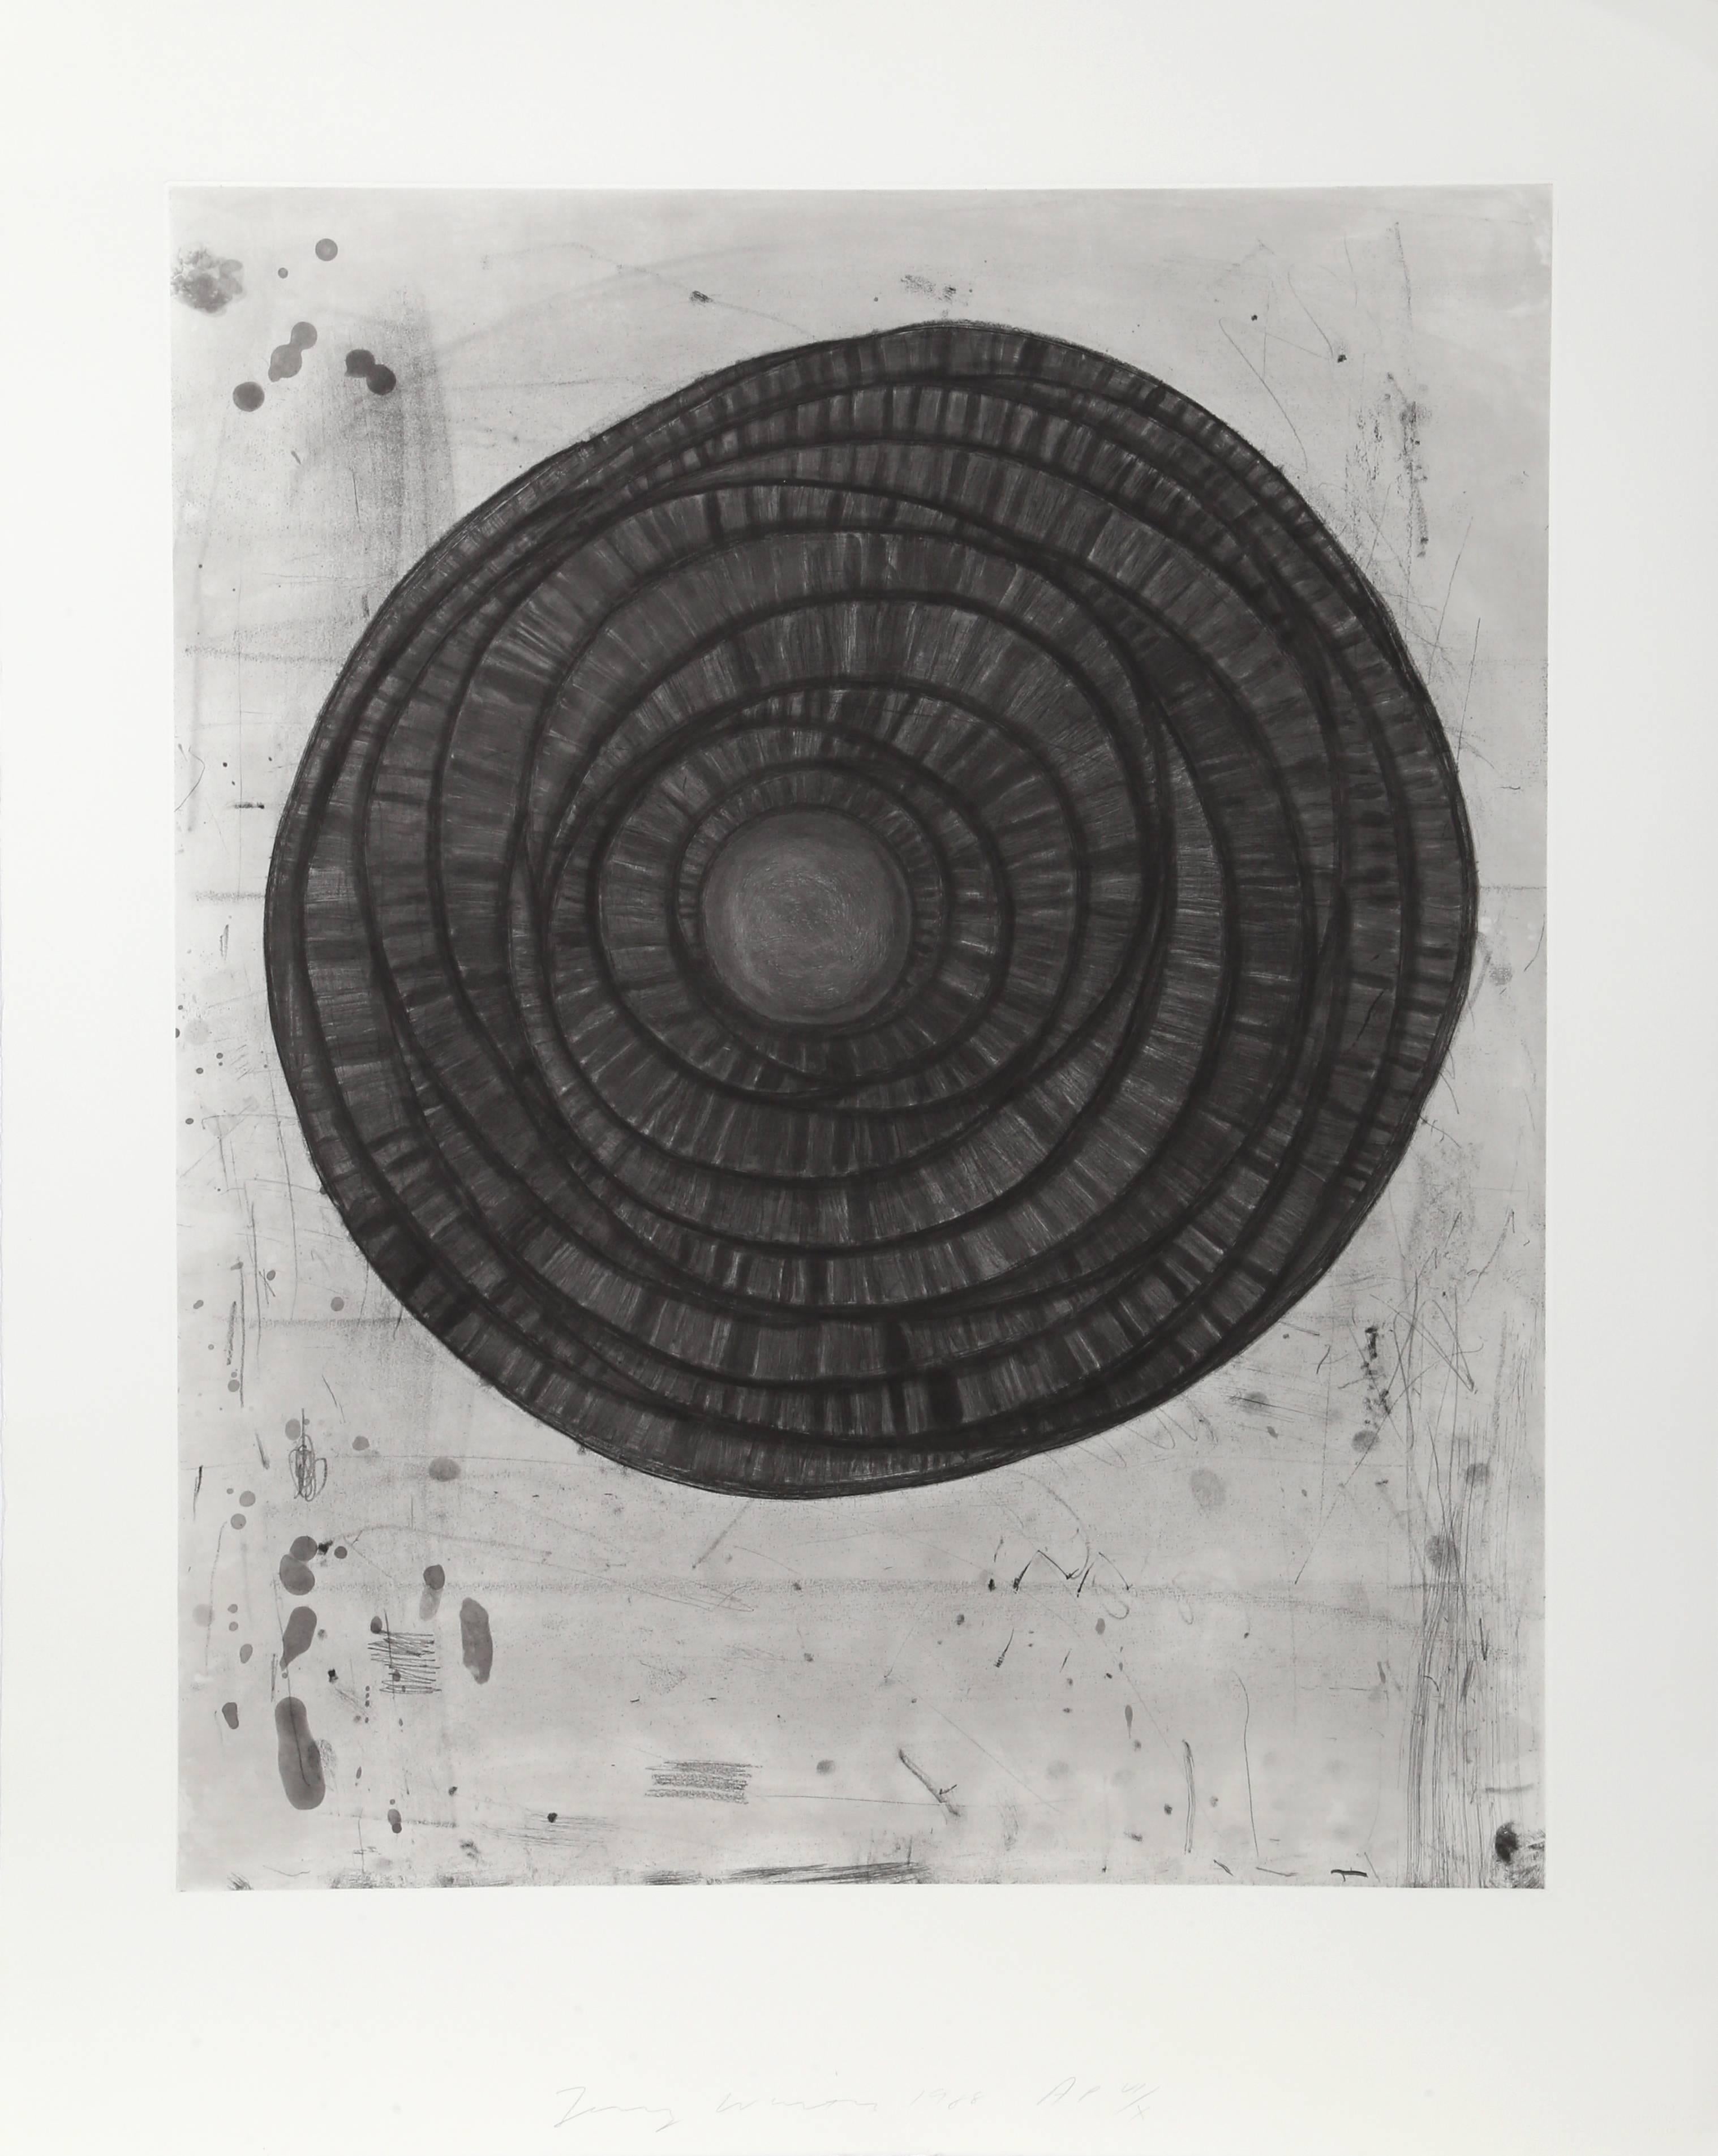 Artist: Terry Winters, American (1949 - )
Title: No. 1
Year: 1988
Medium: Etching with Aquatint, signed and numbered in pencil
Edition: AP VI/X
Image: 27.5 x 22 inches
Size: 35 x 28 inches